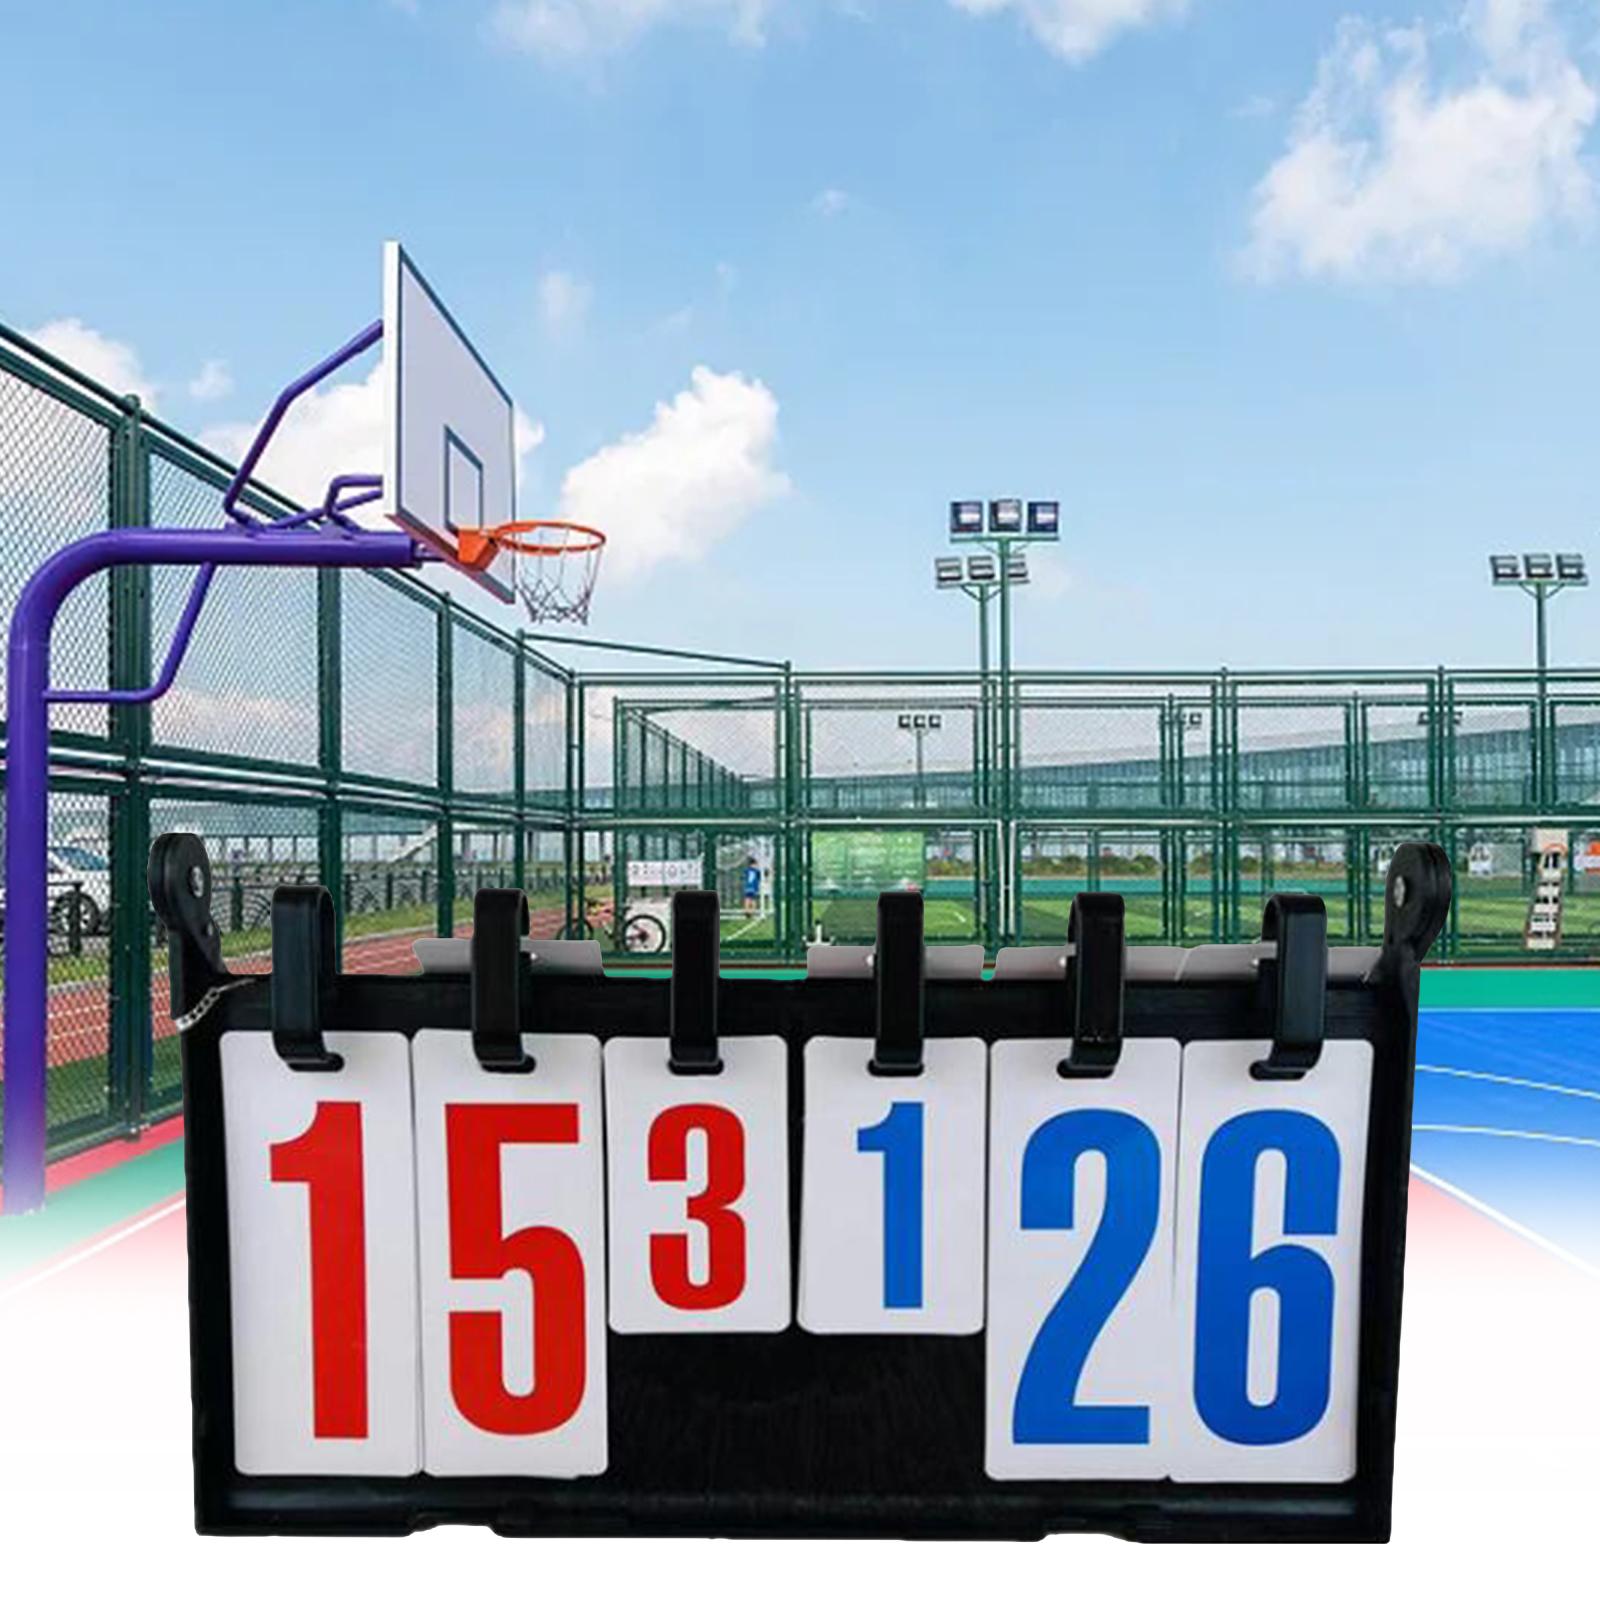 Scoreboard Portable 6 Digit for Basketball Competitive Sports Indoor Outdoor